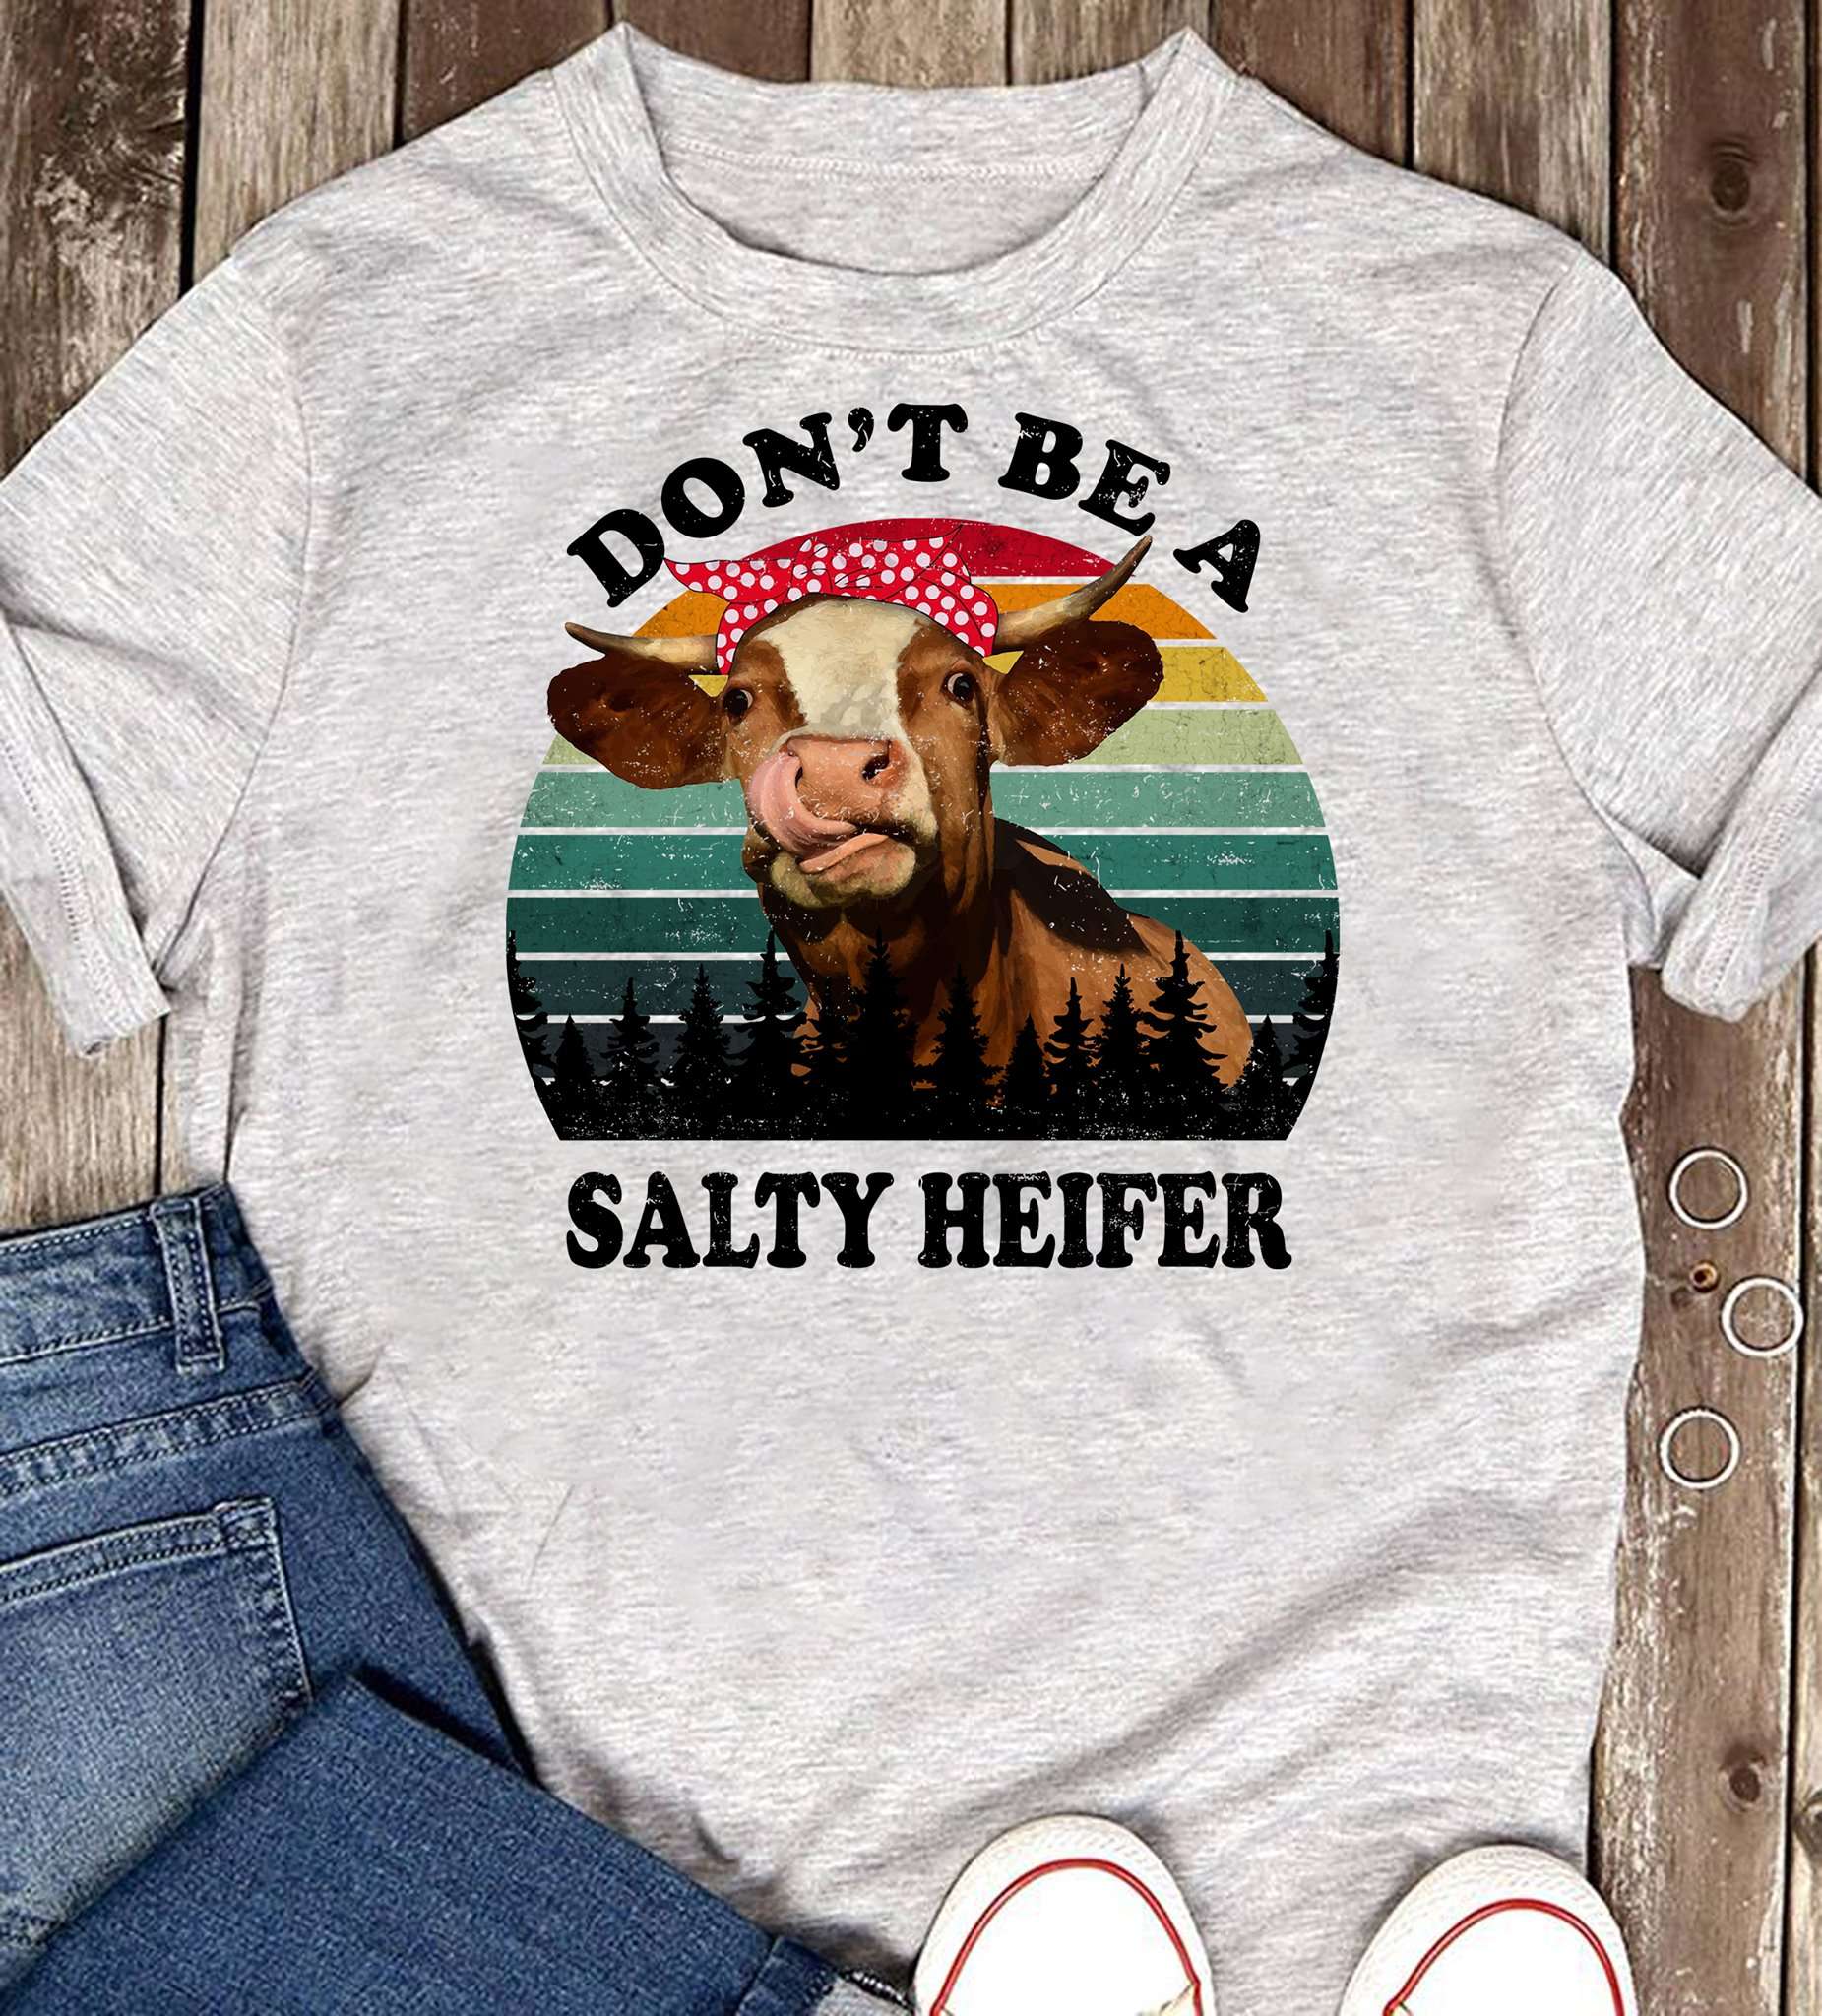 Cow Girl - Don't be a salty heifer